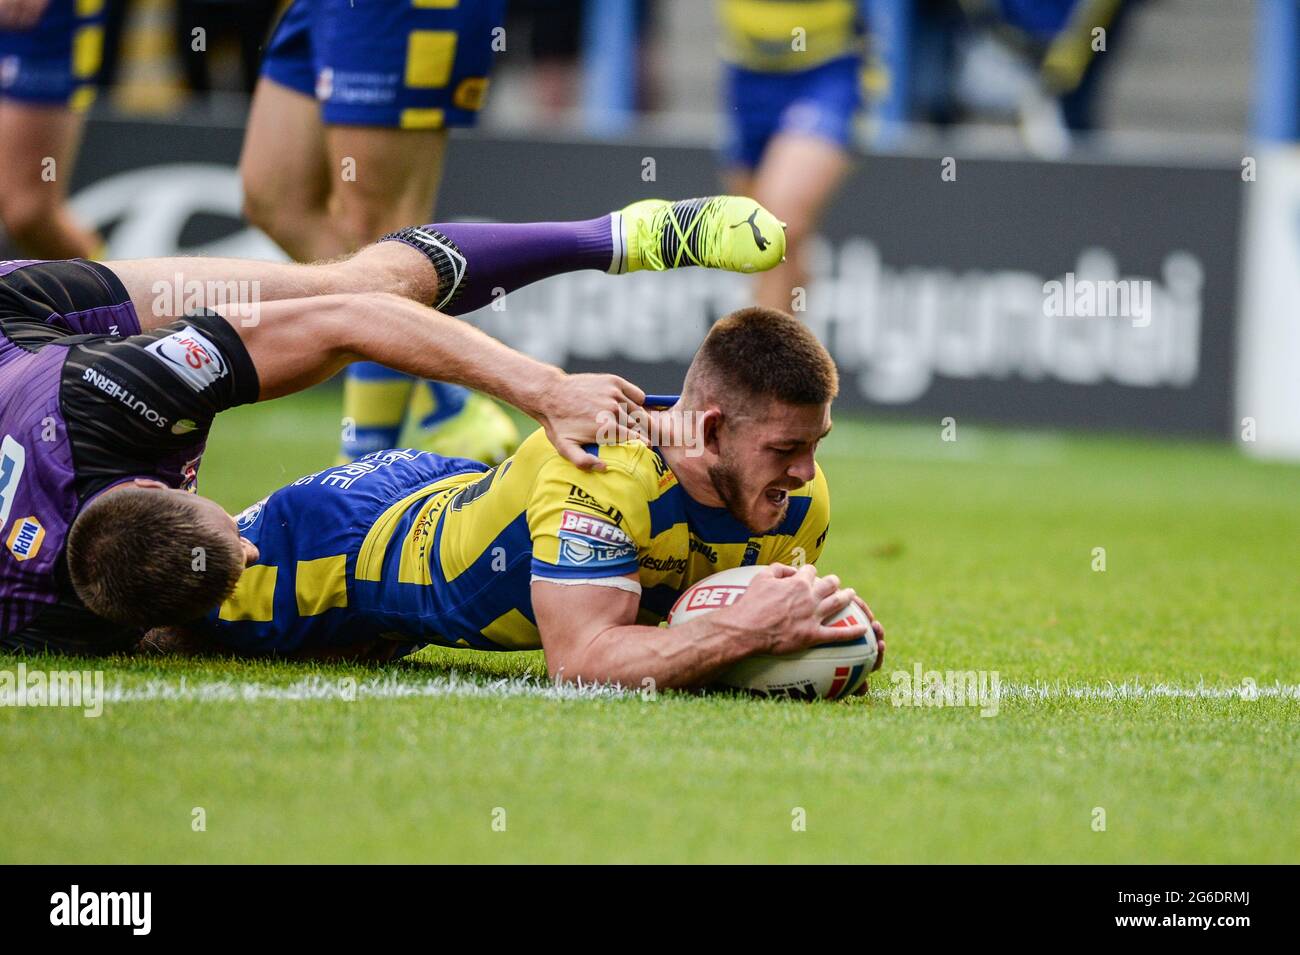 Warrington, England - 5 July 2021 - Danny Walker (16) of Warrington Wolves scores a try during the Rugby League Betfred Super League Warrington Wolves vs Leeds Rhinos at Halliwell Jones Stadium, Warrington, UK  Dean Williams/Alamy Live Stock Photo